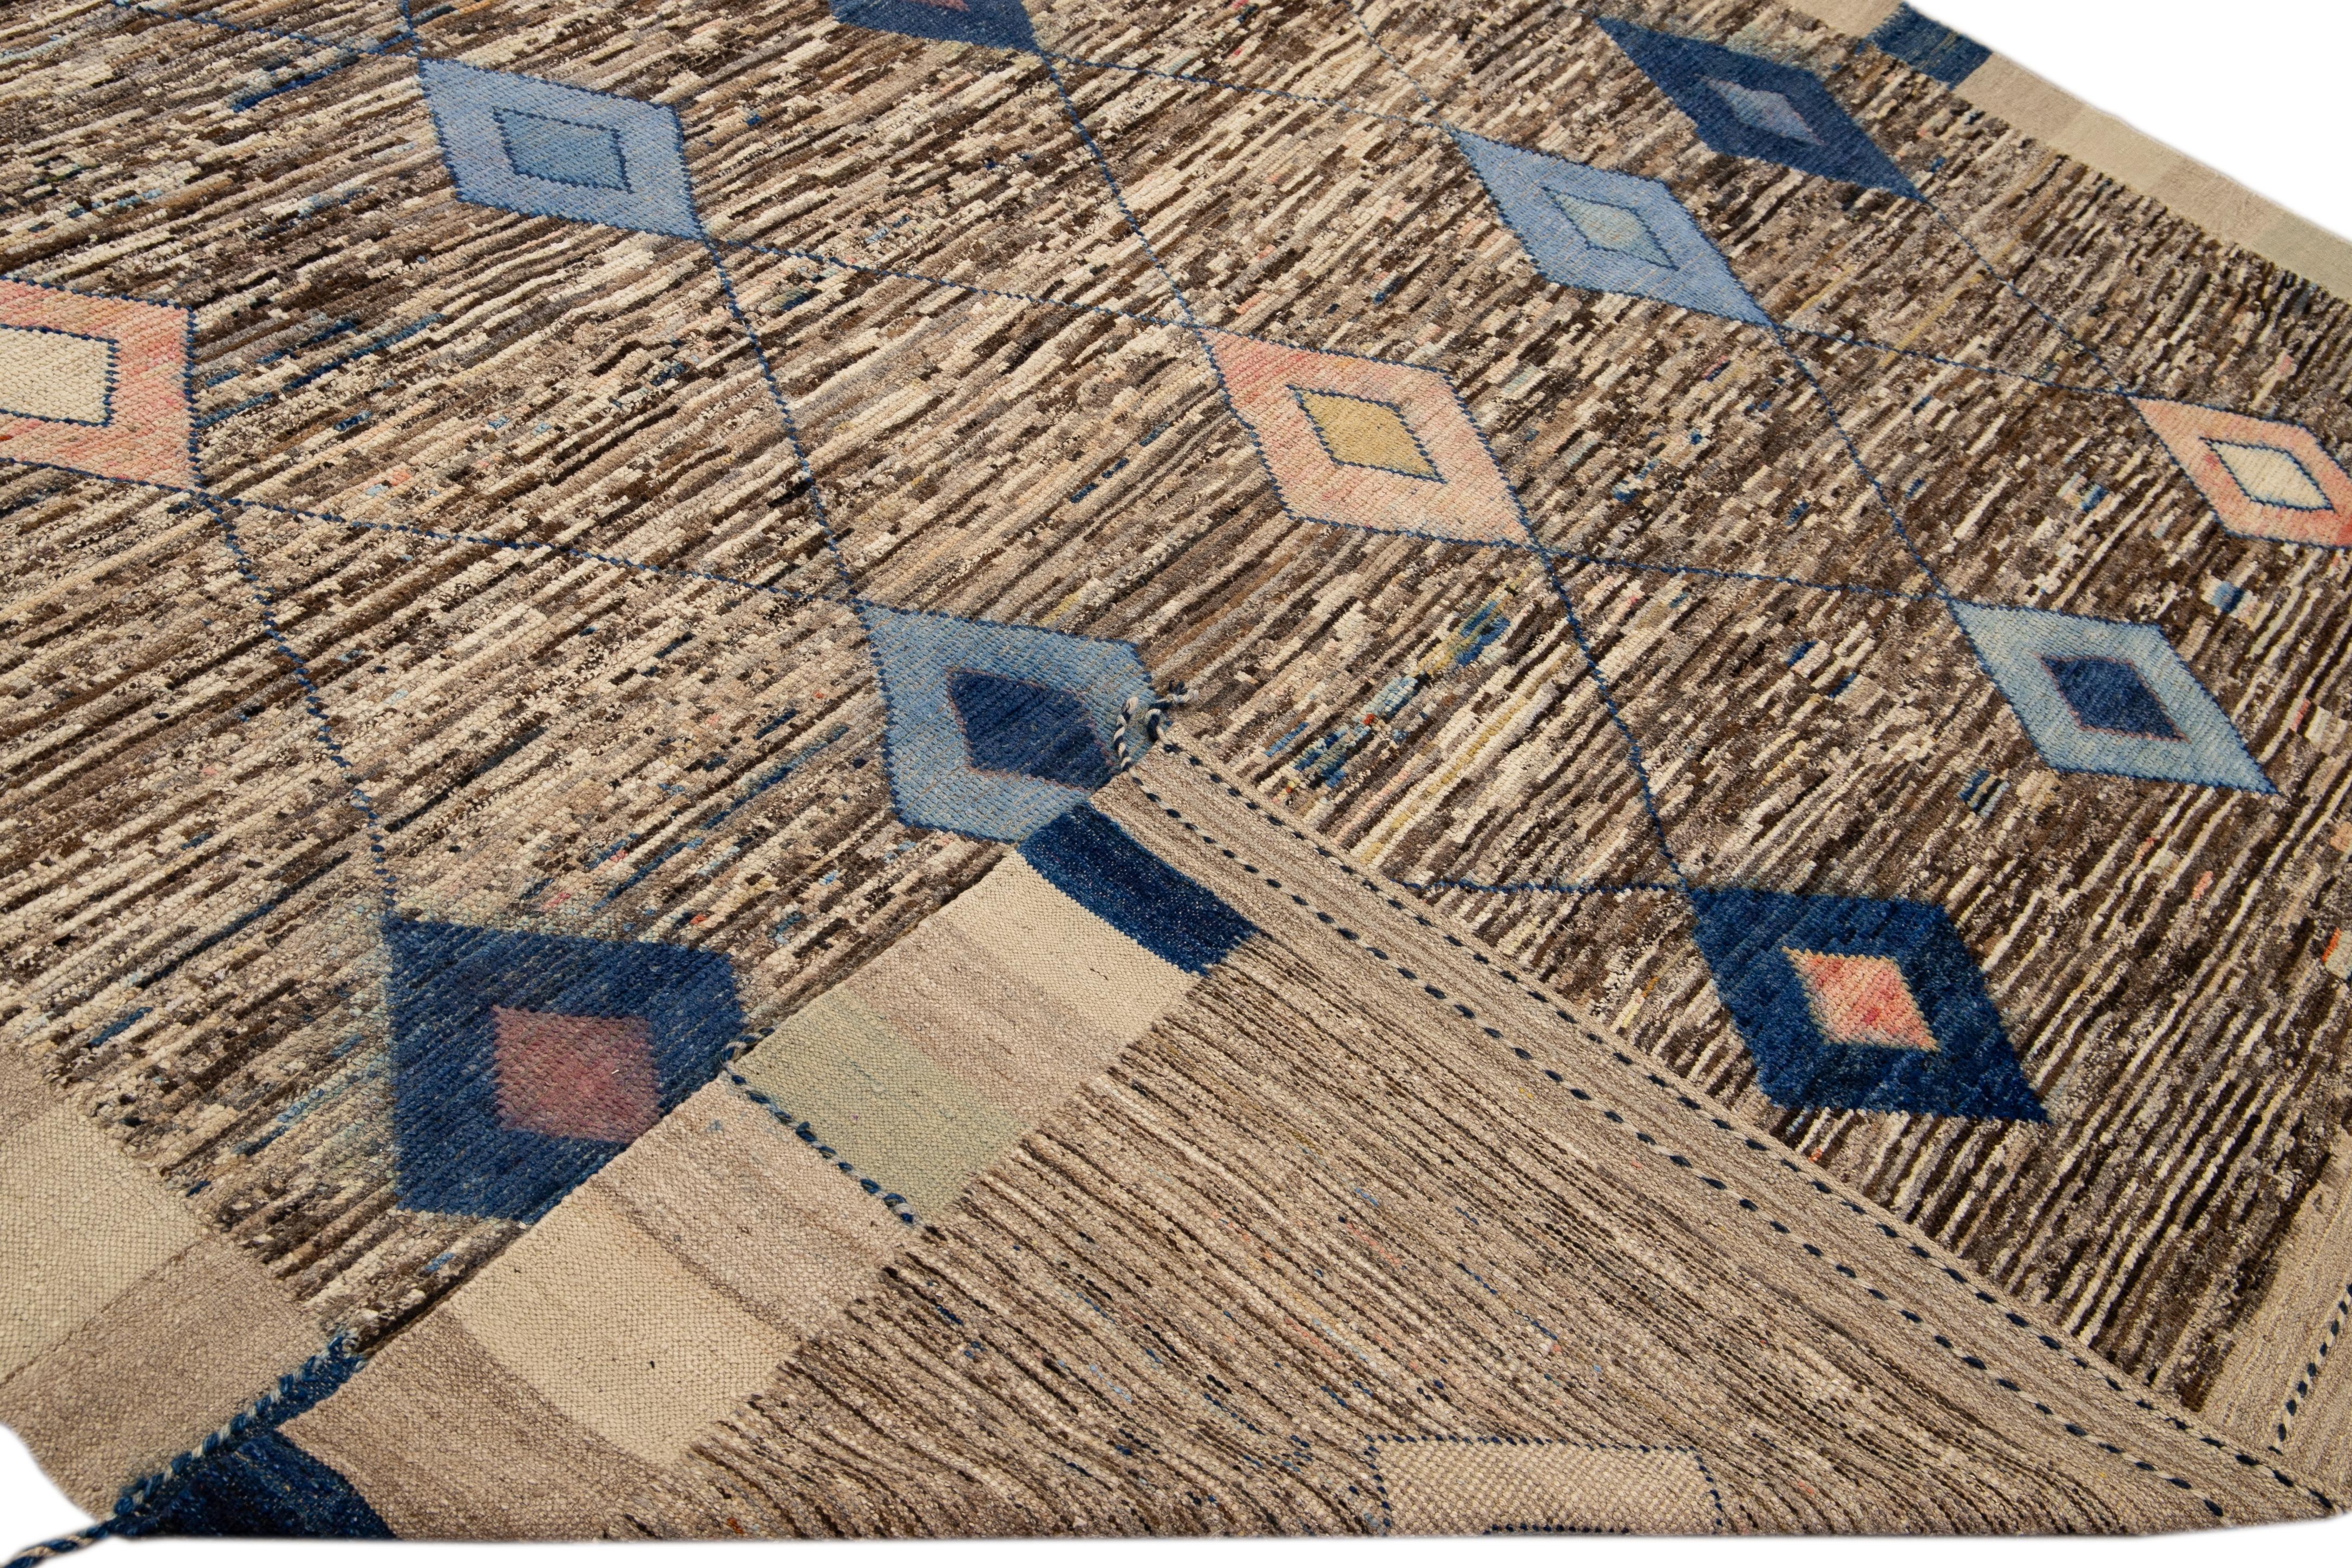 Beautiful Moroccan style handmade wool rug with a brown field. This Modern rug has peach and blue accents and beige-blue braid fringes featuring a gorgeous all-over geometric boho design.

This rug measures: 9'3